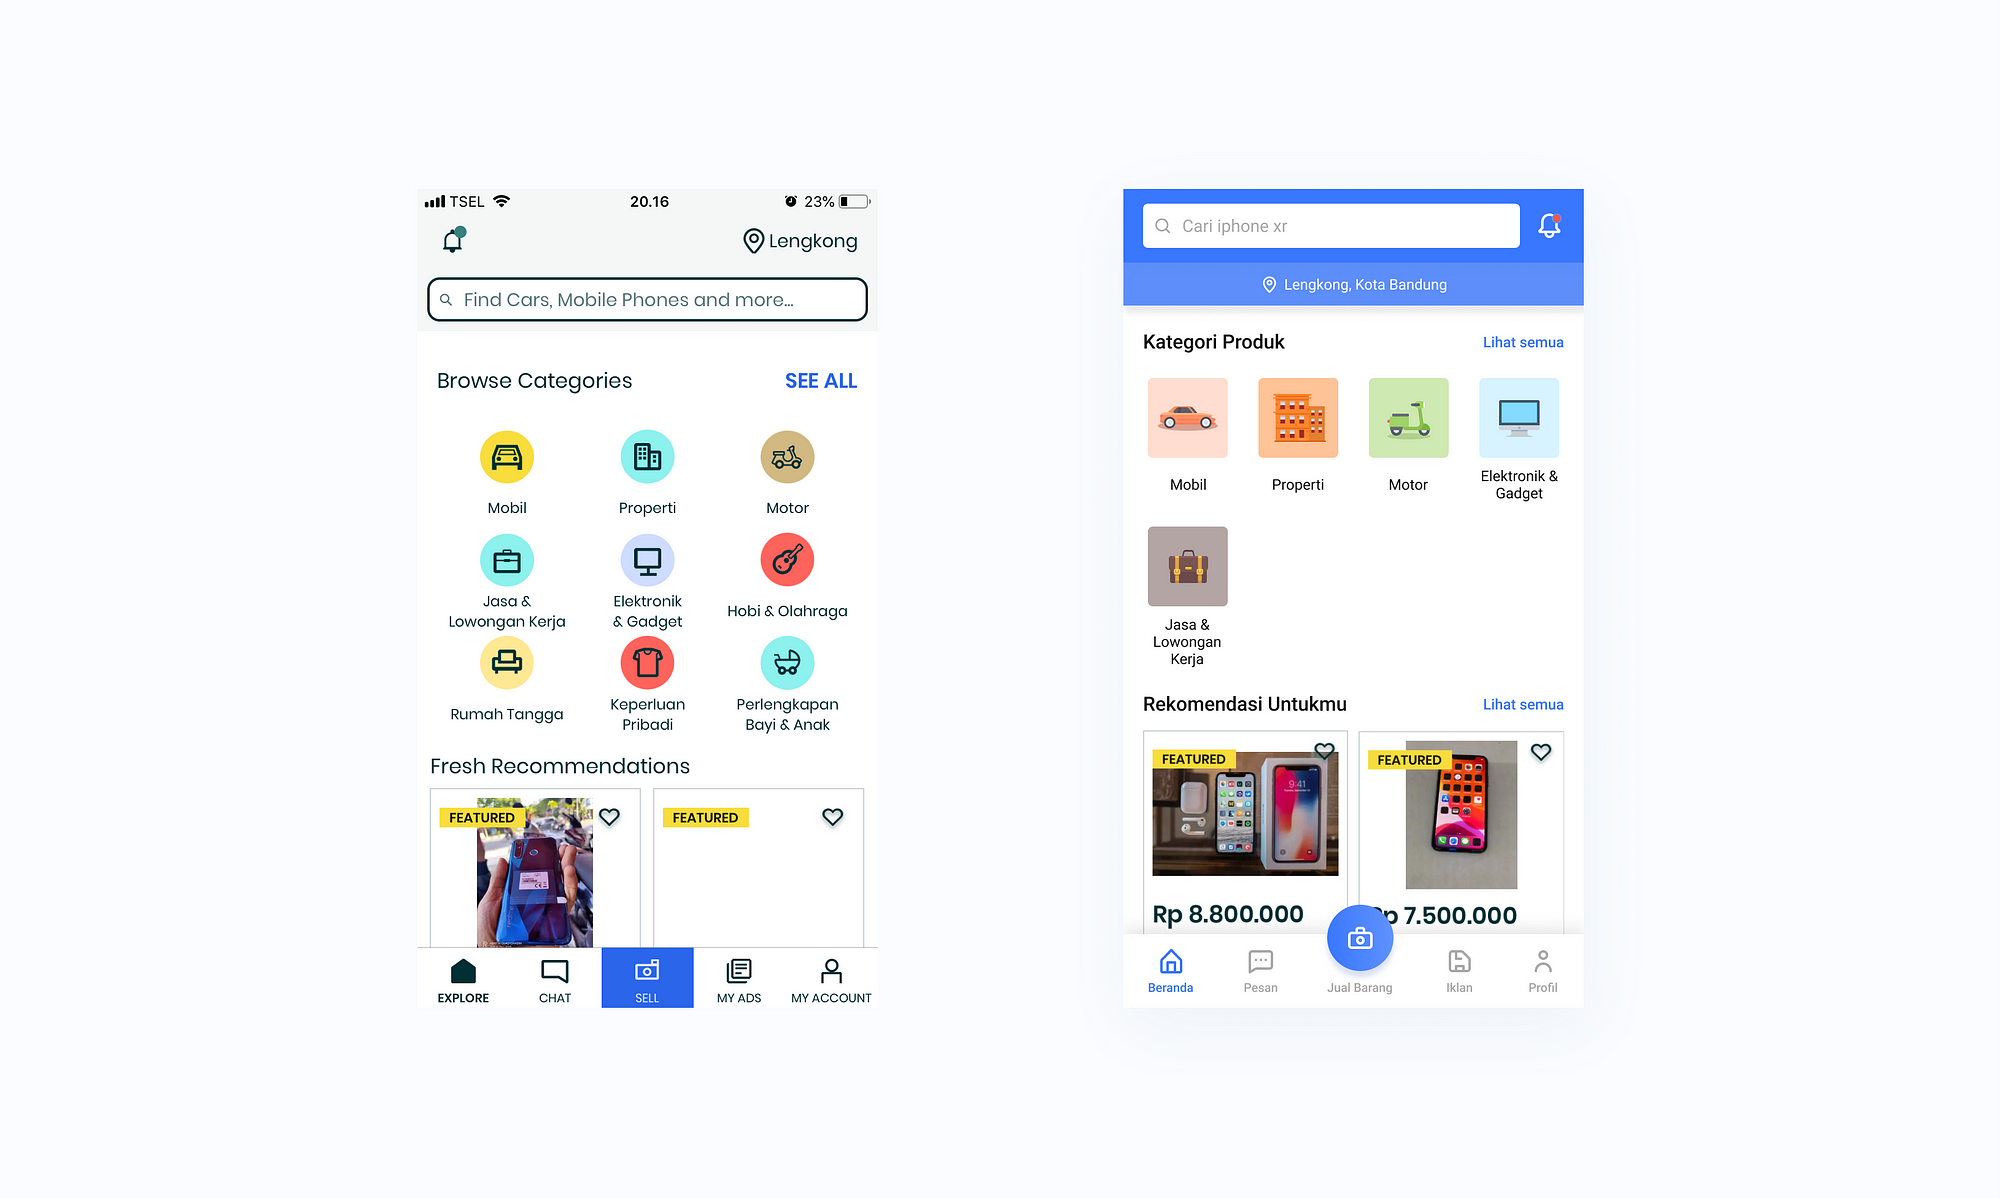 OLX Android app: User Experience Redesign - Anjali - Medium